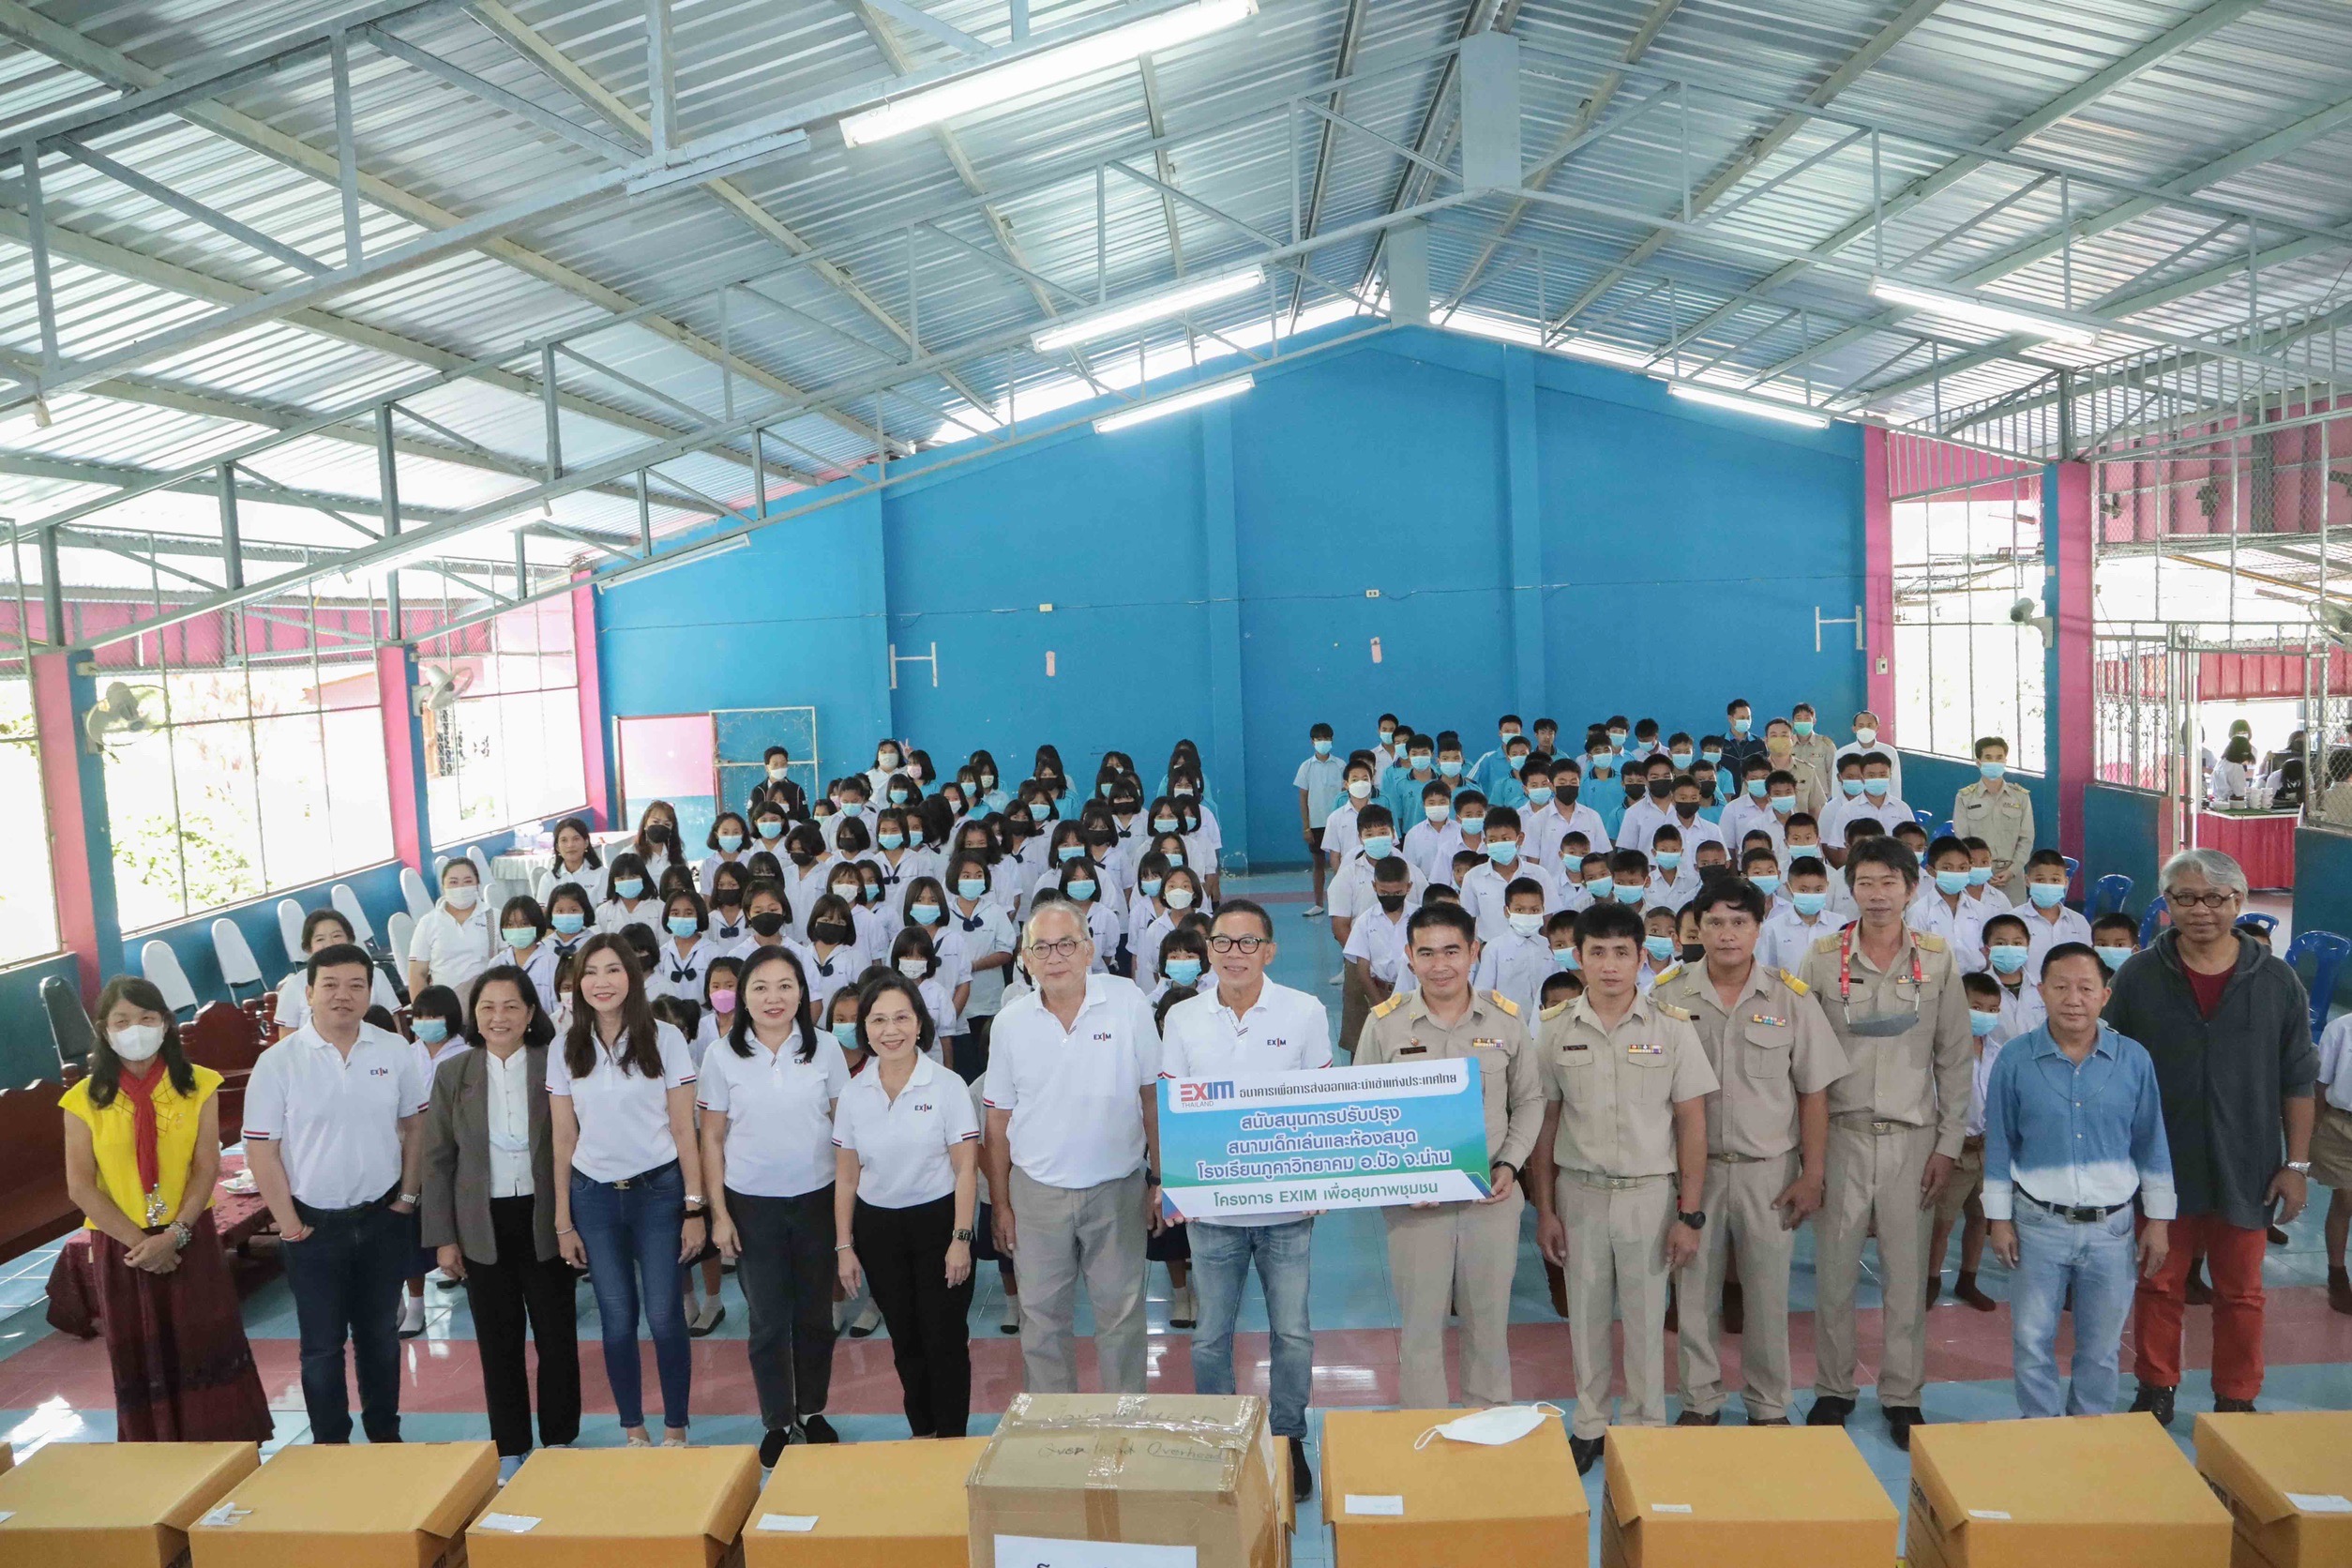 EXIM Thailand Joins Hands with Customers in Enhancement of Learning Opportunities for Students of Phuka Wittayakom School in Nan Province